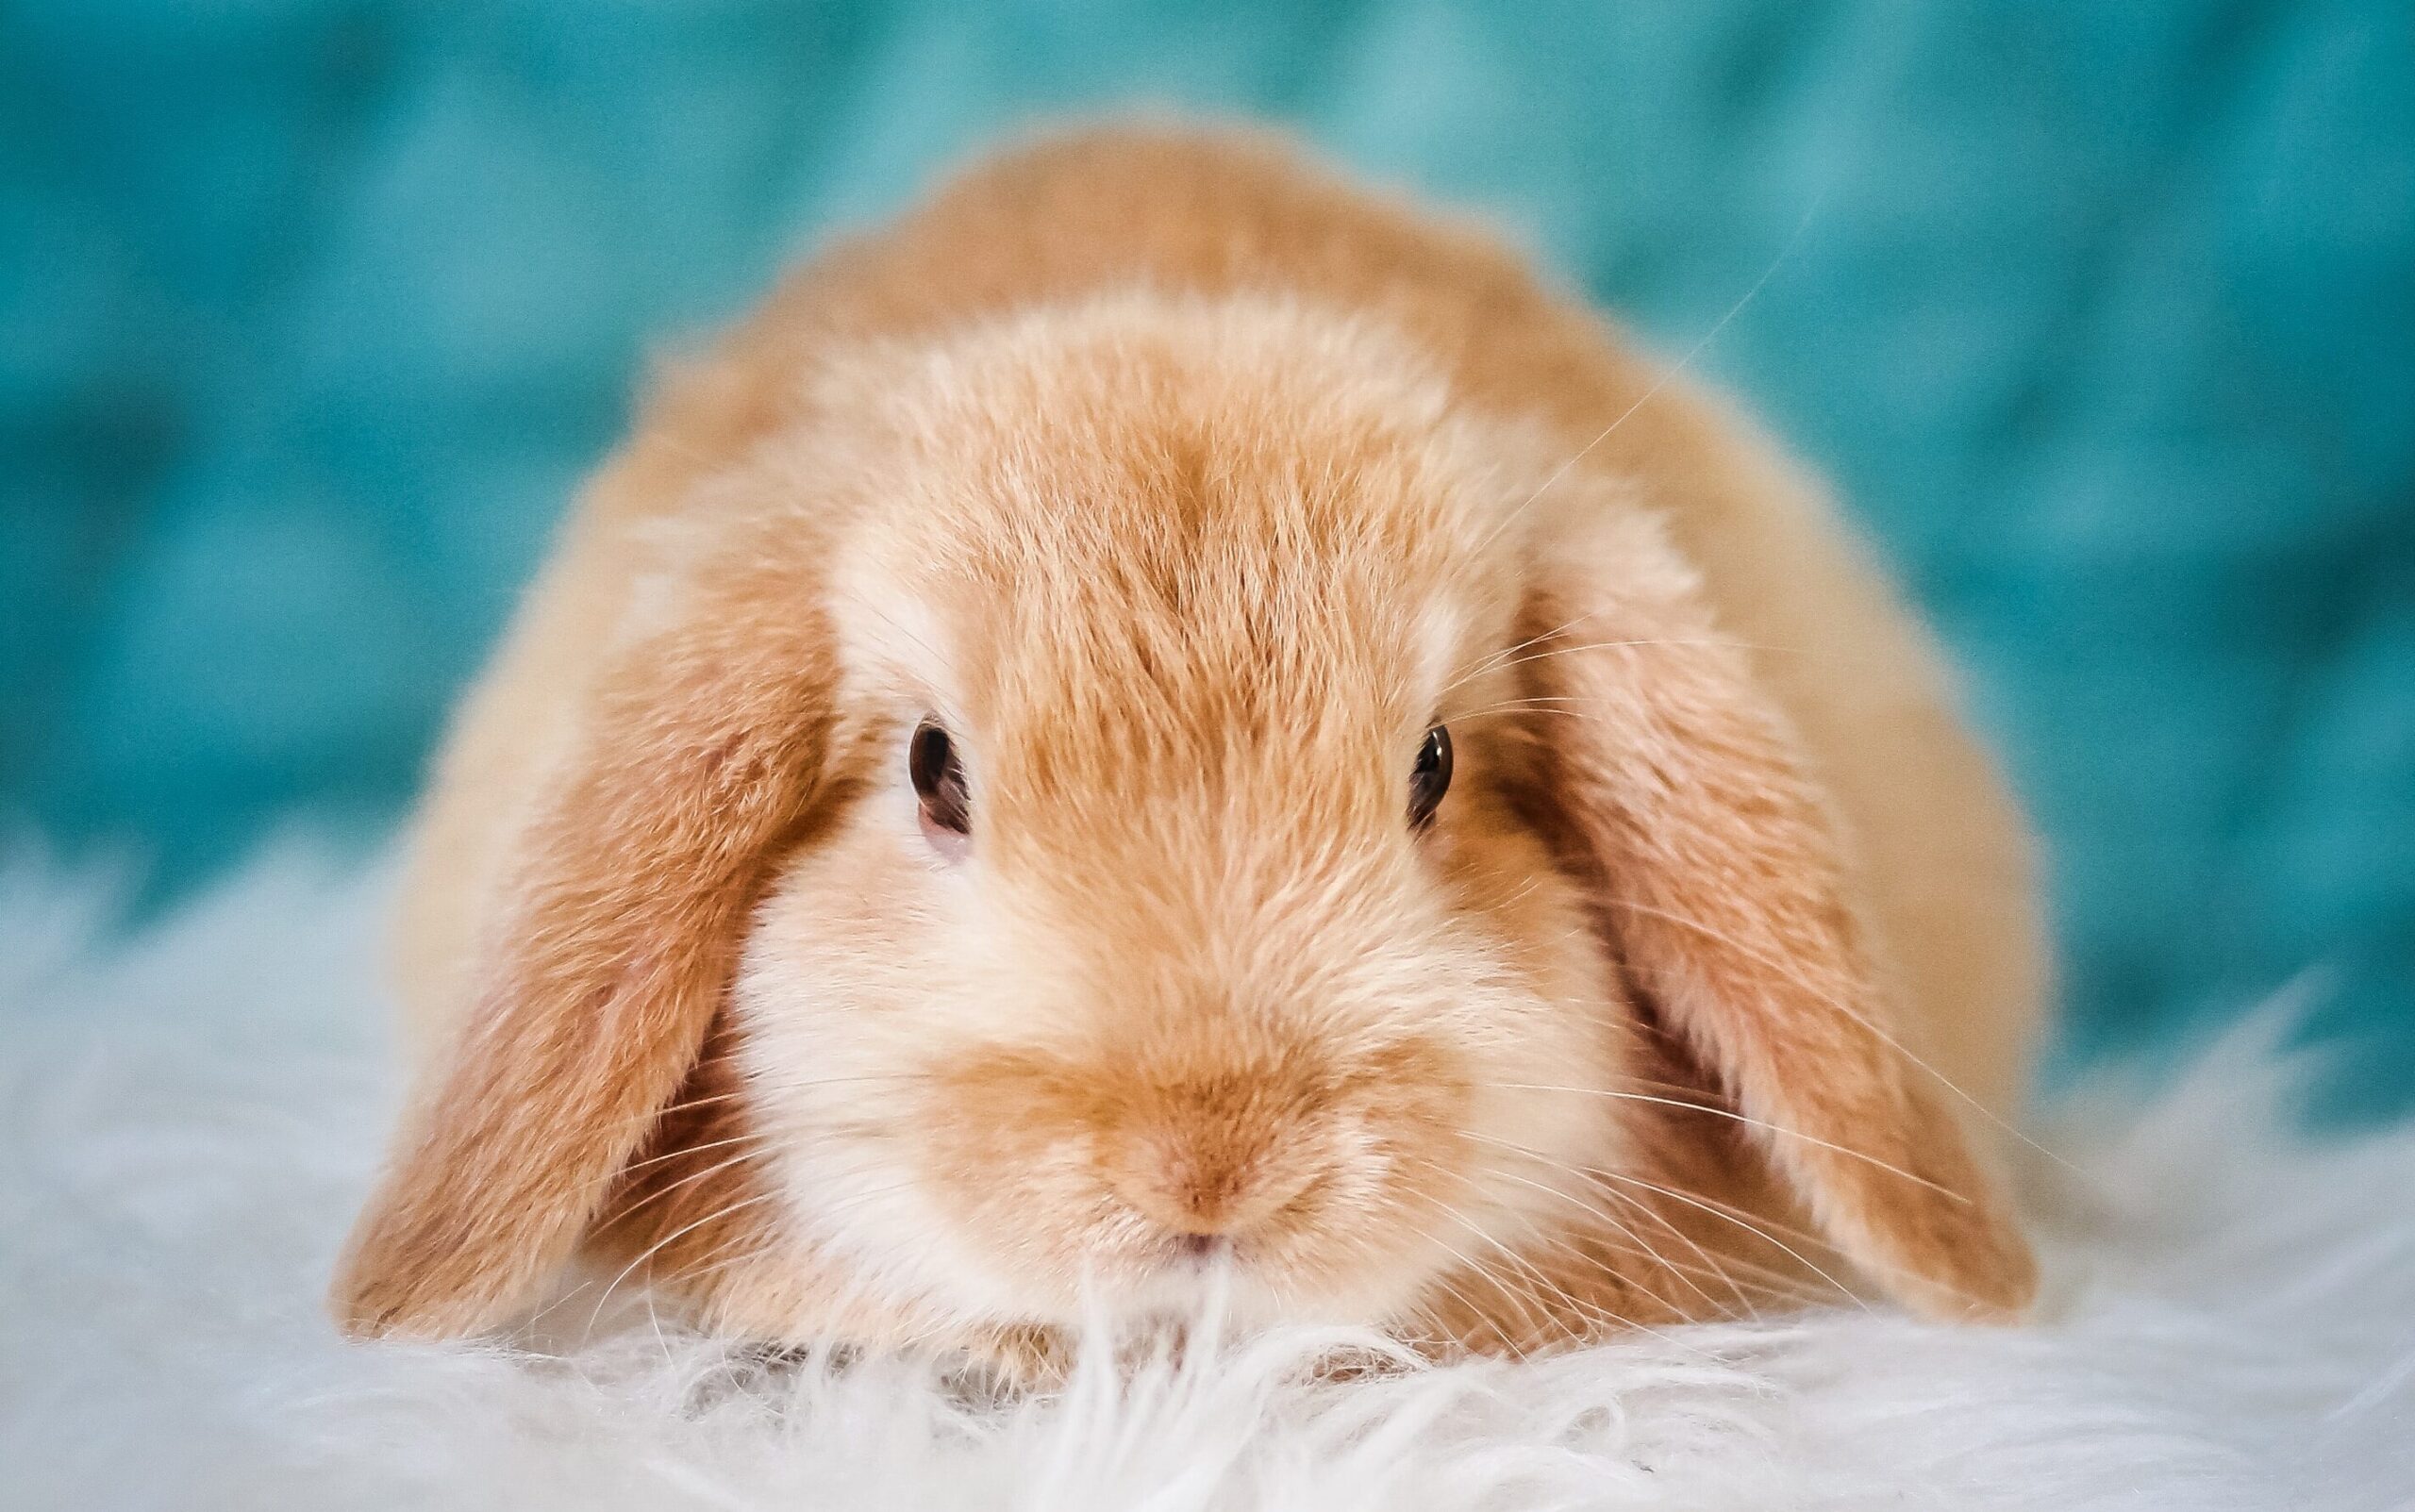 brown rabbit on fluffy blanket with blue  background